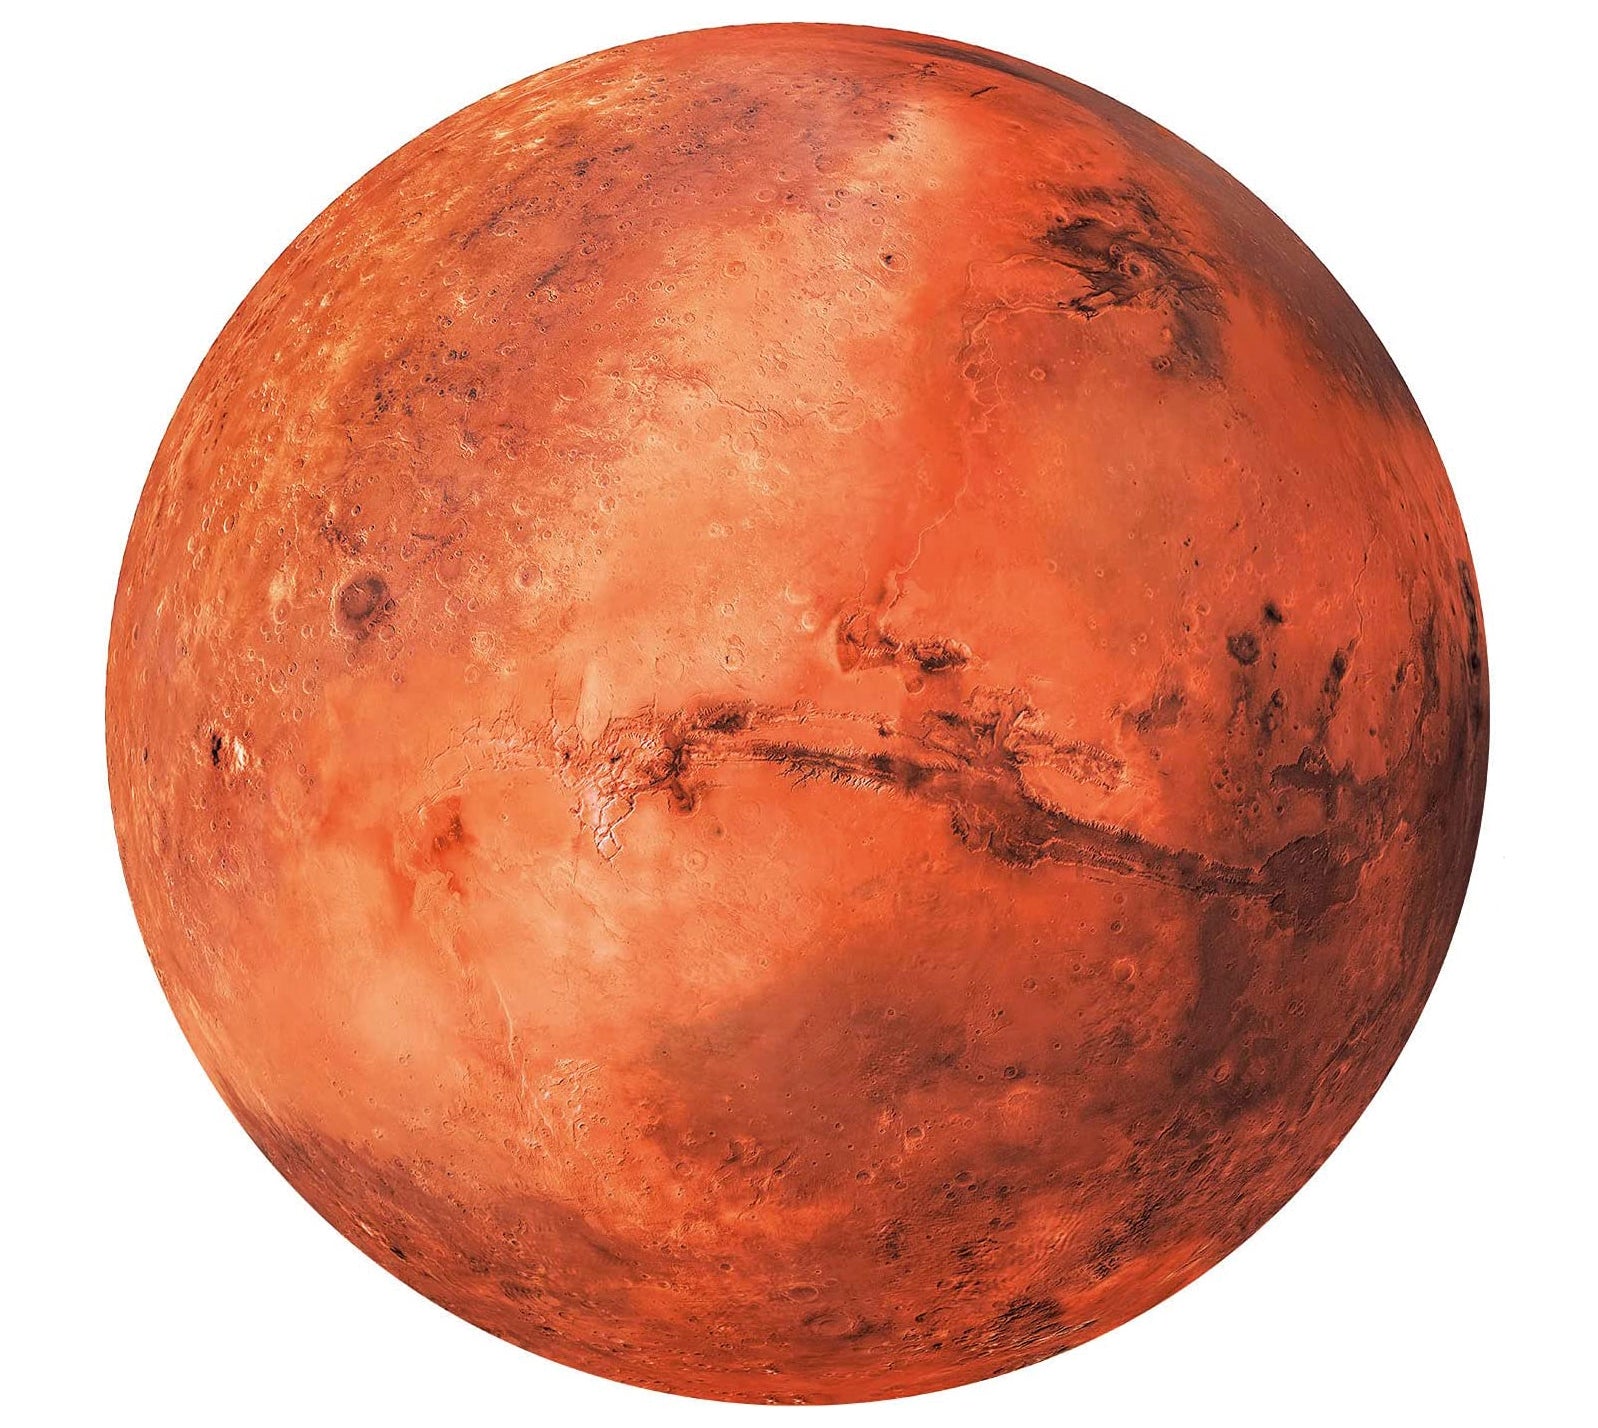 Our new Space puzzle features the most detailed image of planet Mars you've ever seen (unless you're the Hubble Telescope).